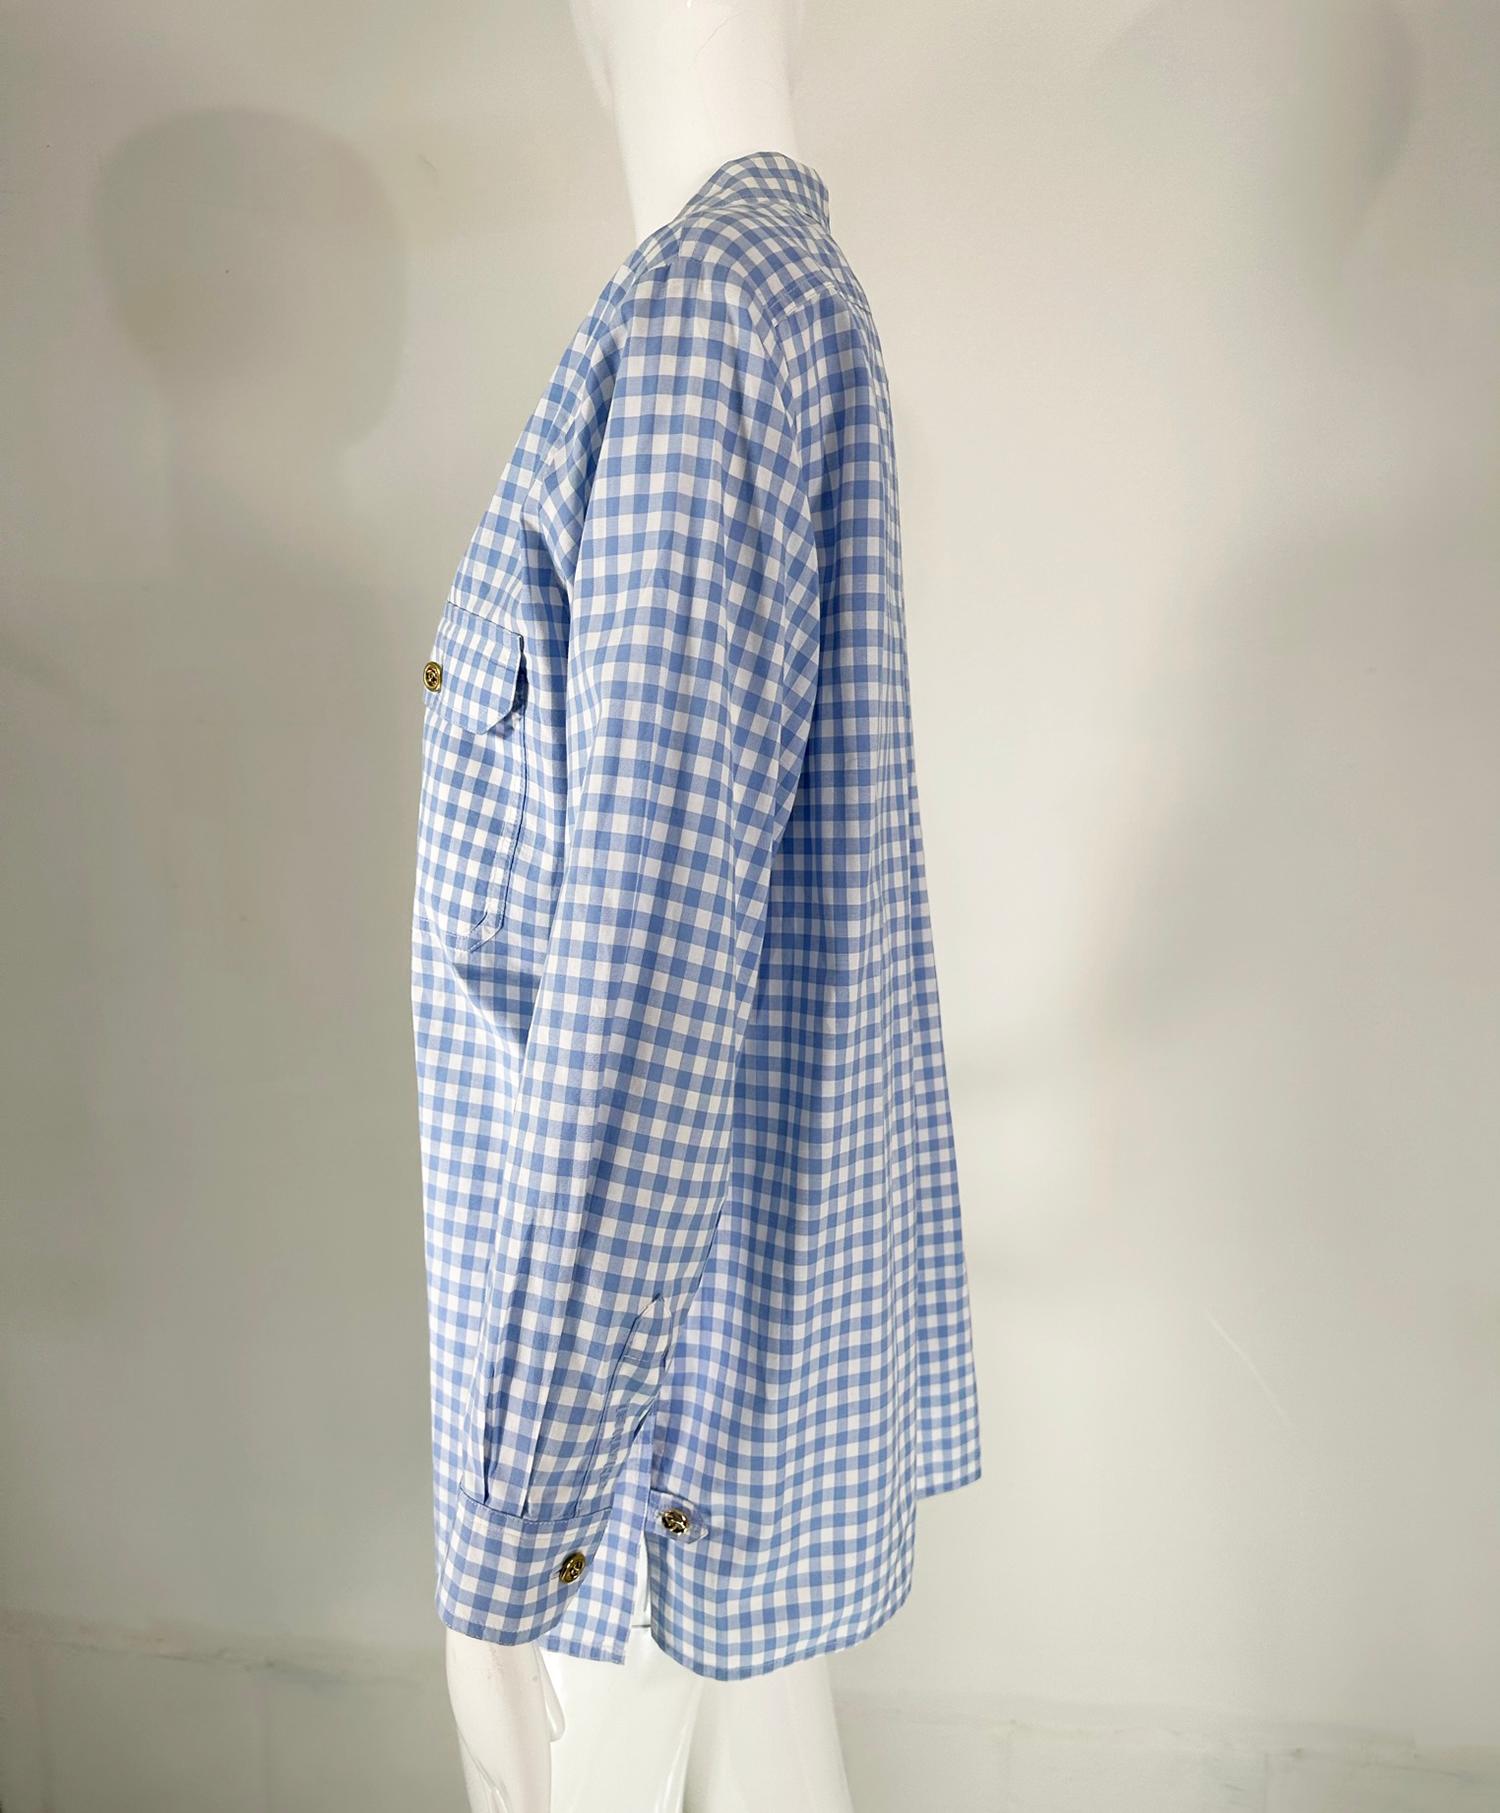 Women's Chanel S/S 1995 Blue & White Cotton Check Long Sleeve Button Front Blouse